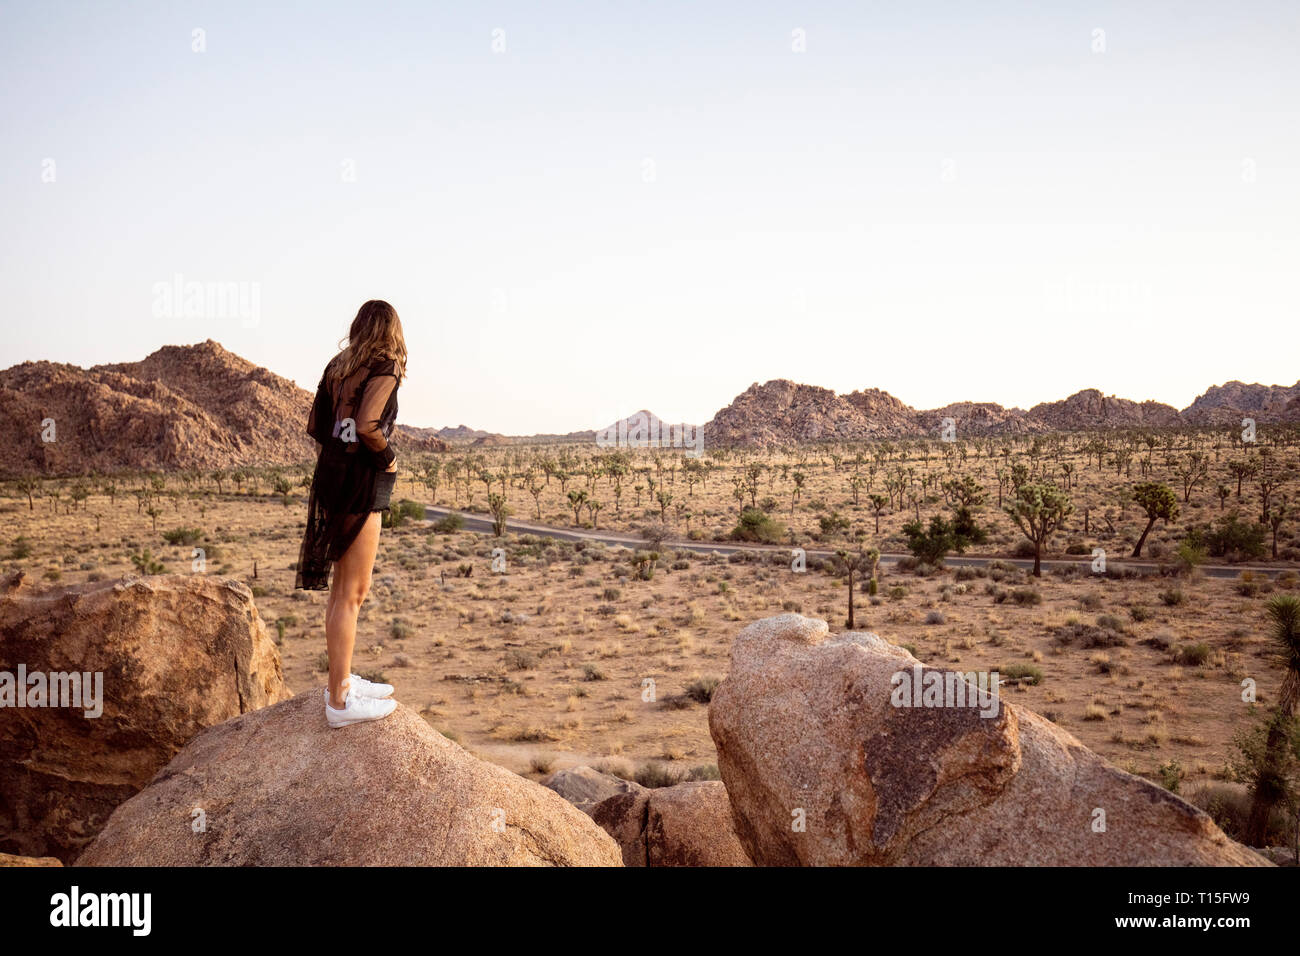 USA, California, Los Angeles, woman on rock overlooking landscape in Joshua Tree National Park Stock Photo